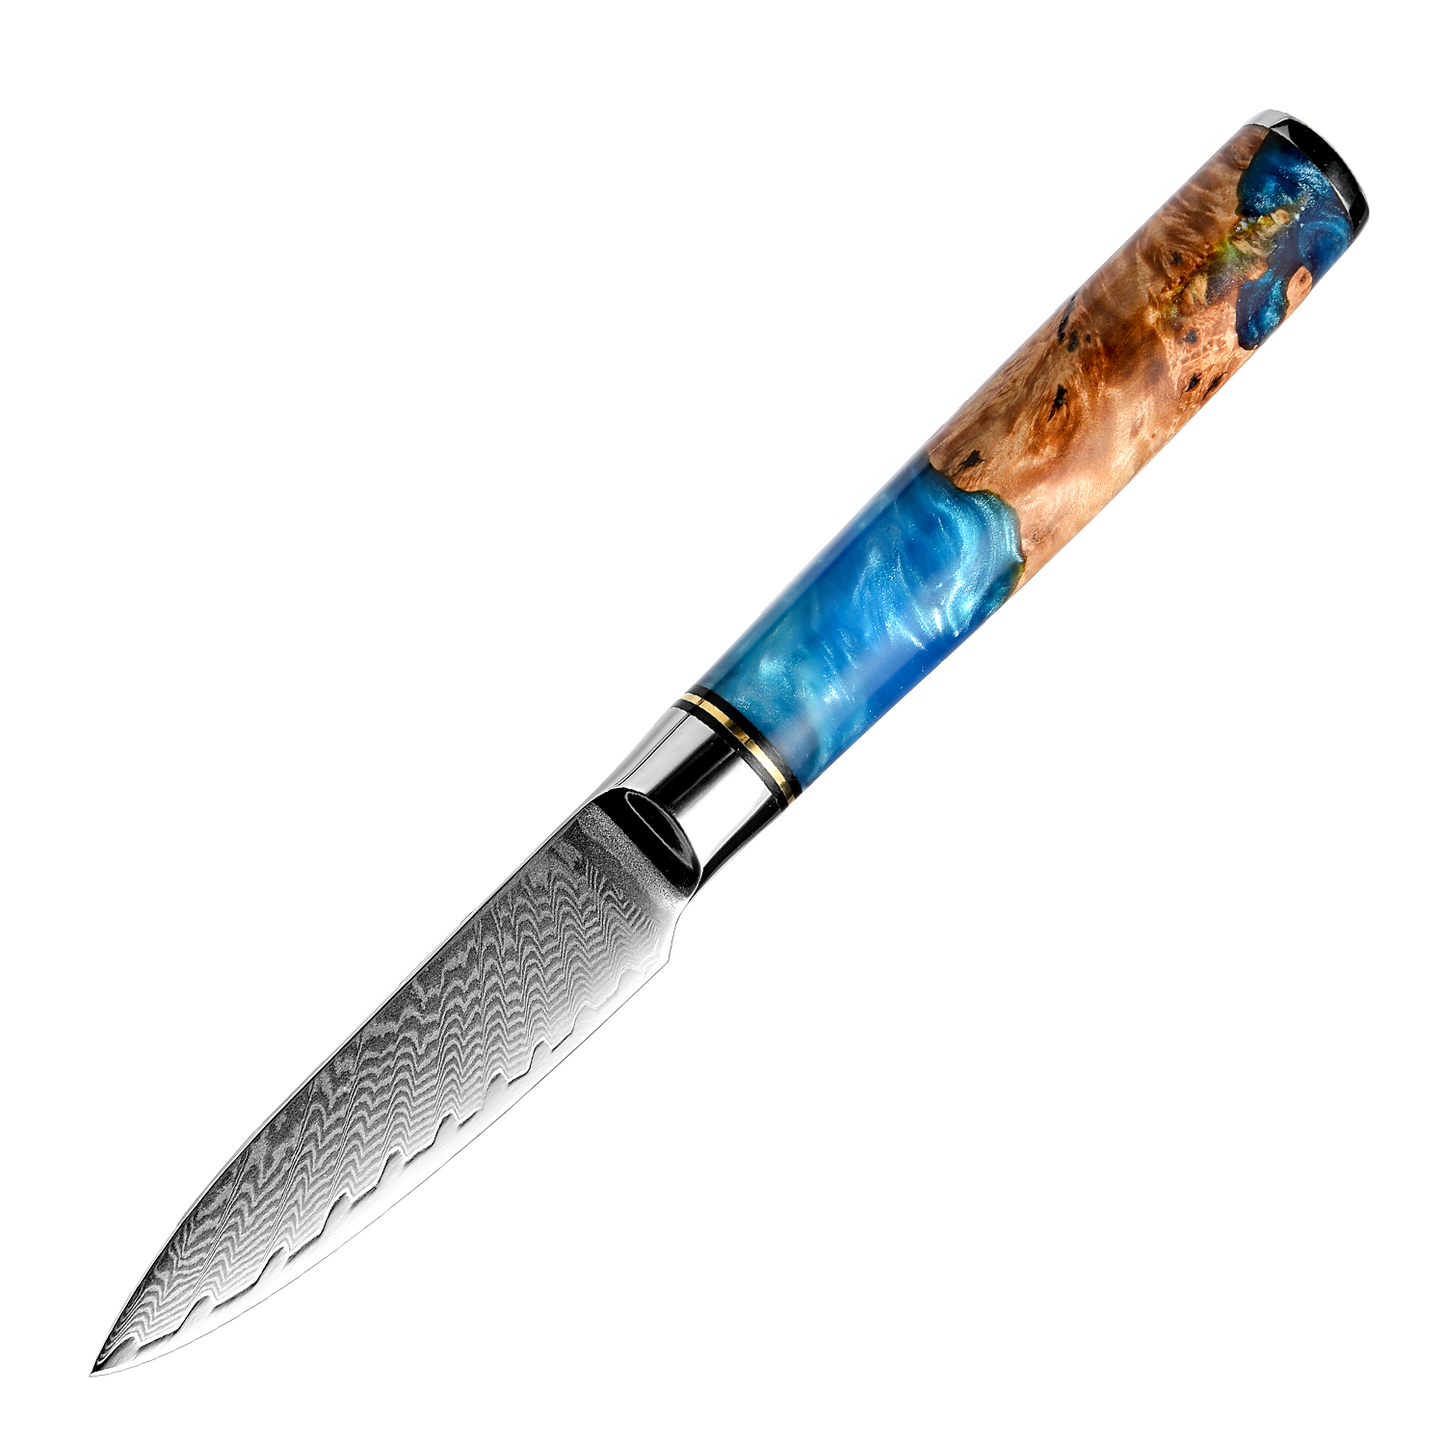 3PCS Vg10 67 Layer Damascus Steel Knife Set with Turquoise Handle - China  Kitchen Knife with Block and Damascus Steel Knife price